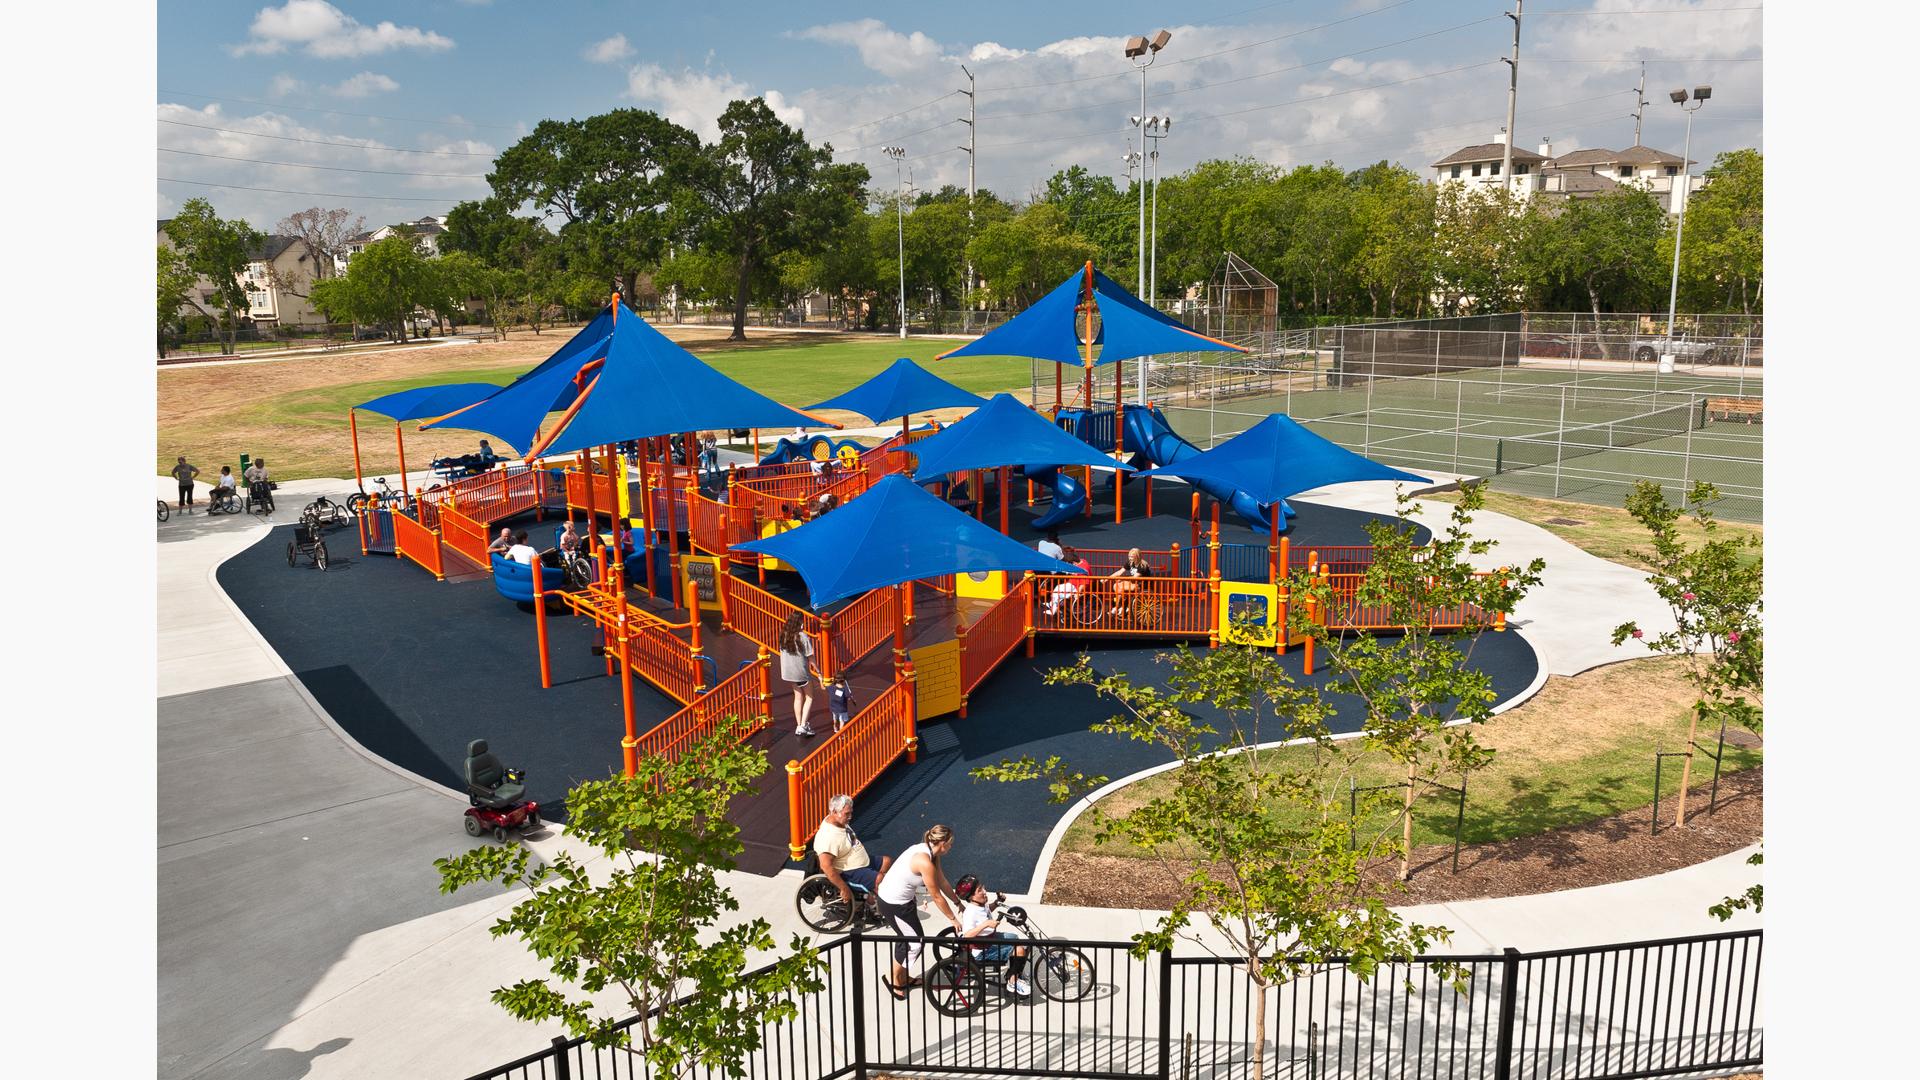 Metropolitan Multi Service Center Houston, TX. A brightly colored PlayBooster® play structure is connected by a series of ramps so all kids can access the many innovative inclusive and sensory activities. Such as the Sway Fun® glider, Sensory Play Center® and CoolToppers®.